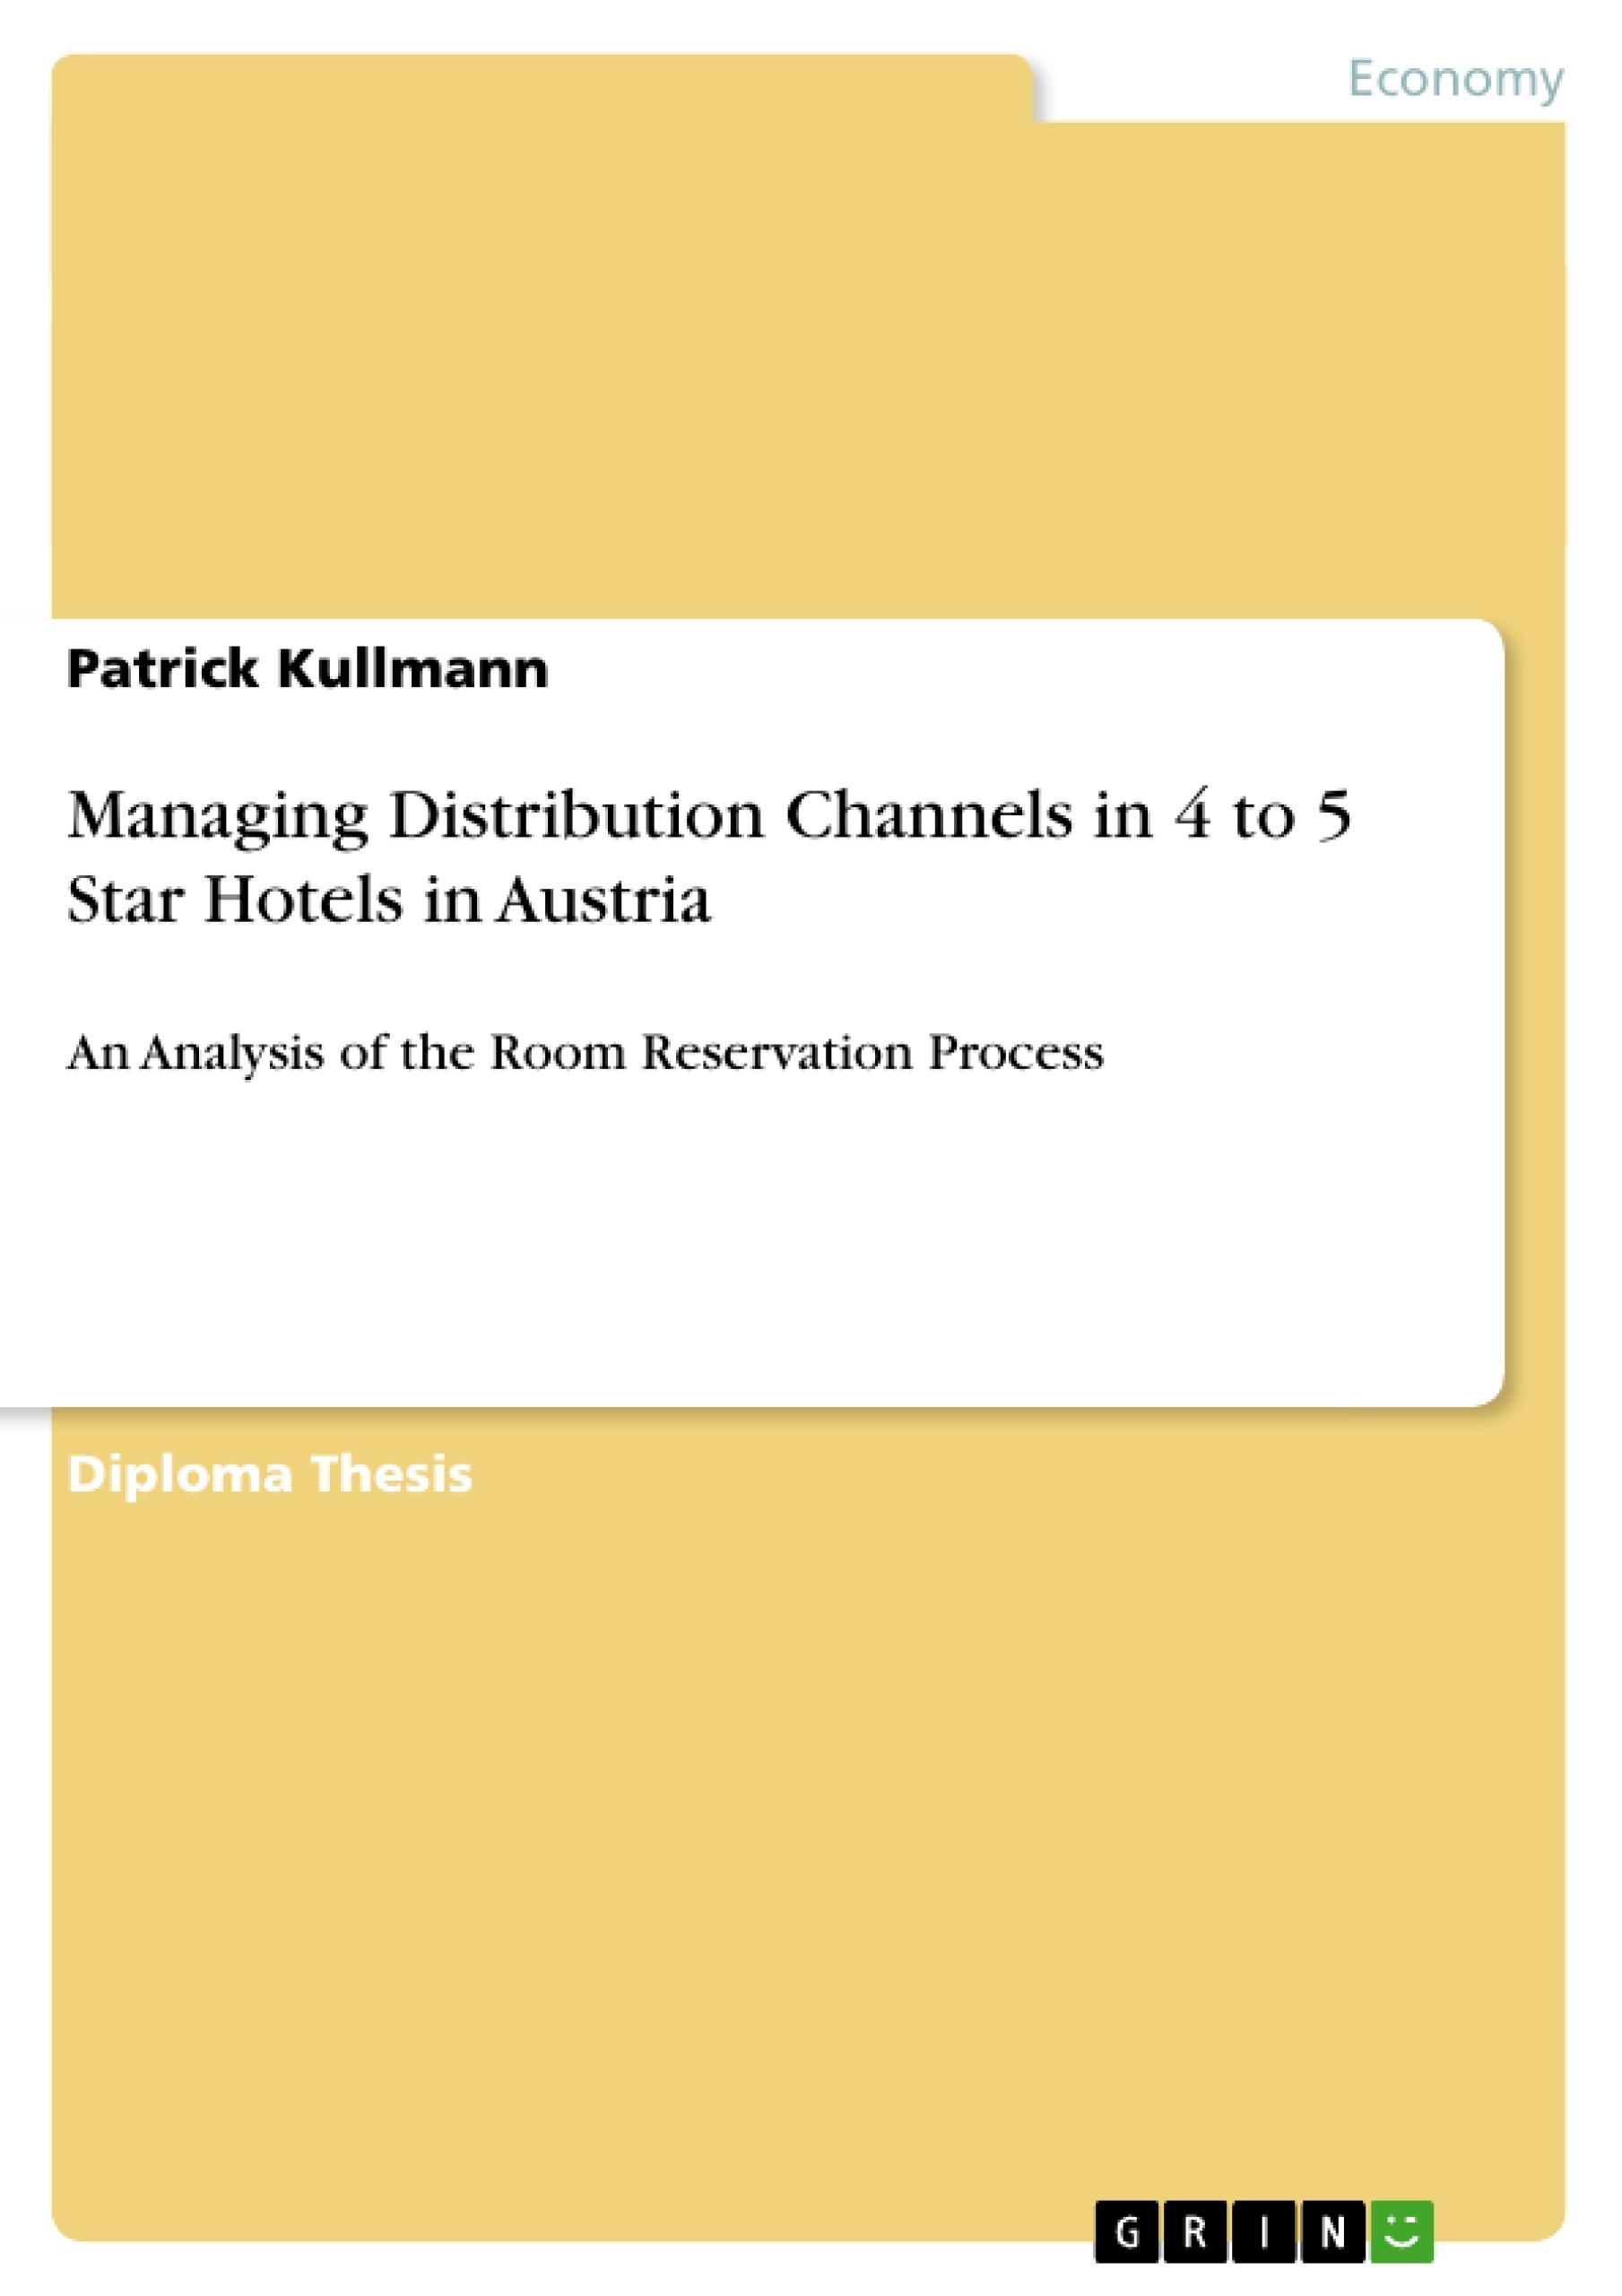 Título: Managing Distribution Channels in 4 to 5 Star Hotels in Austria